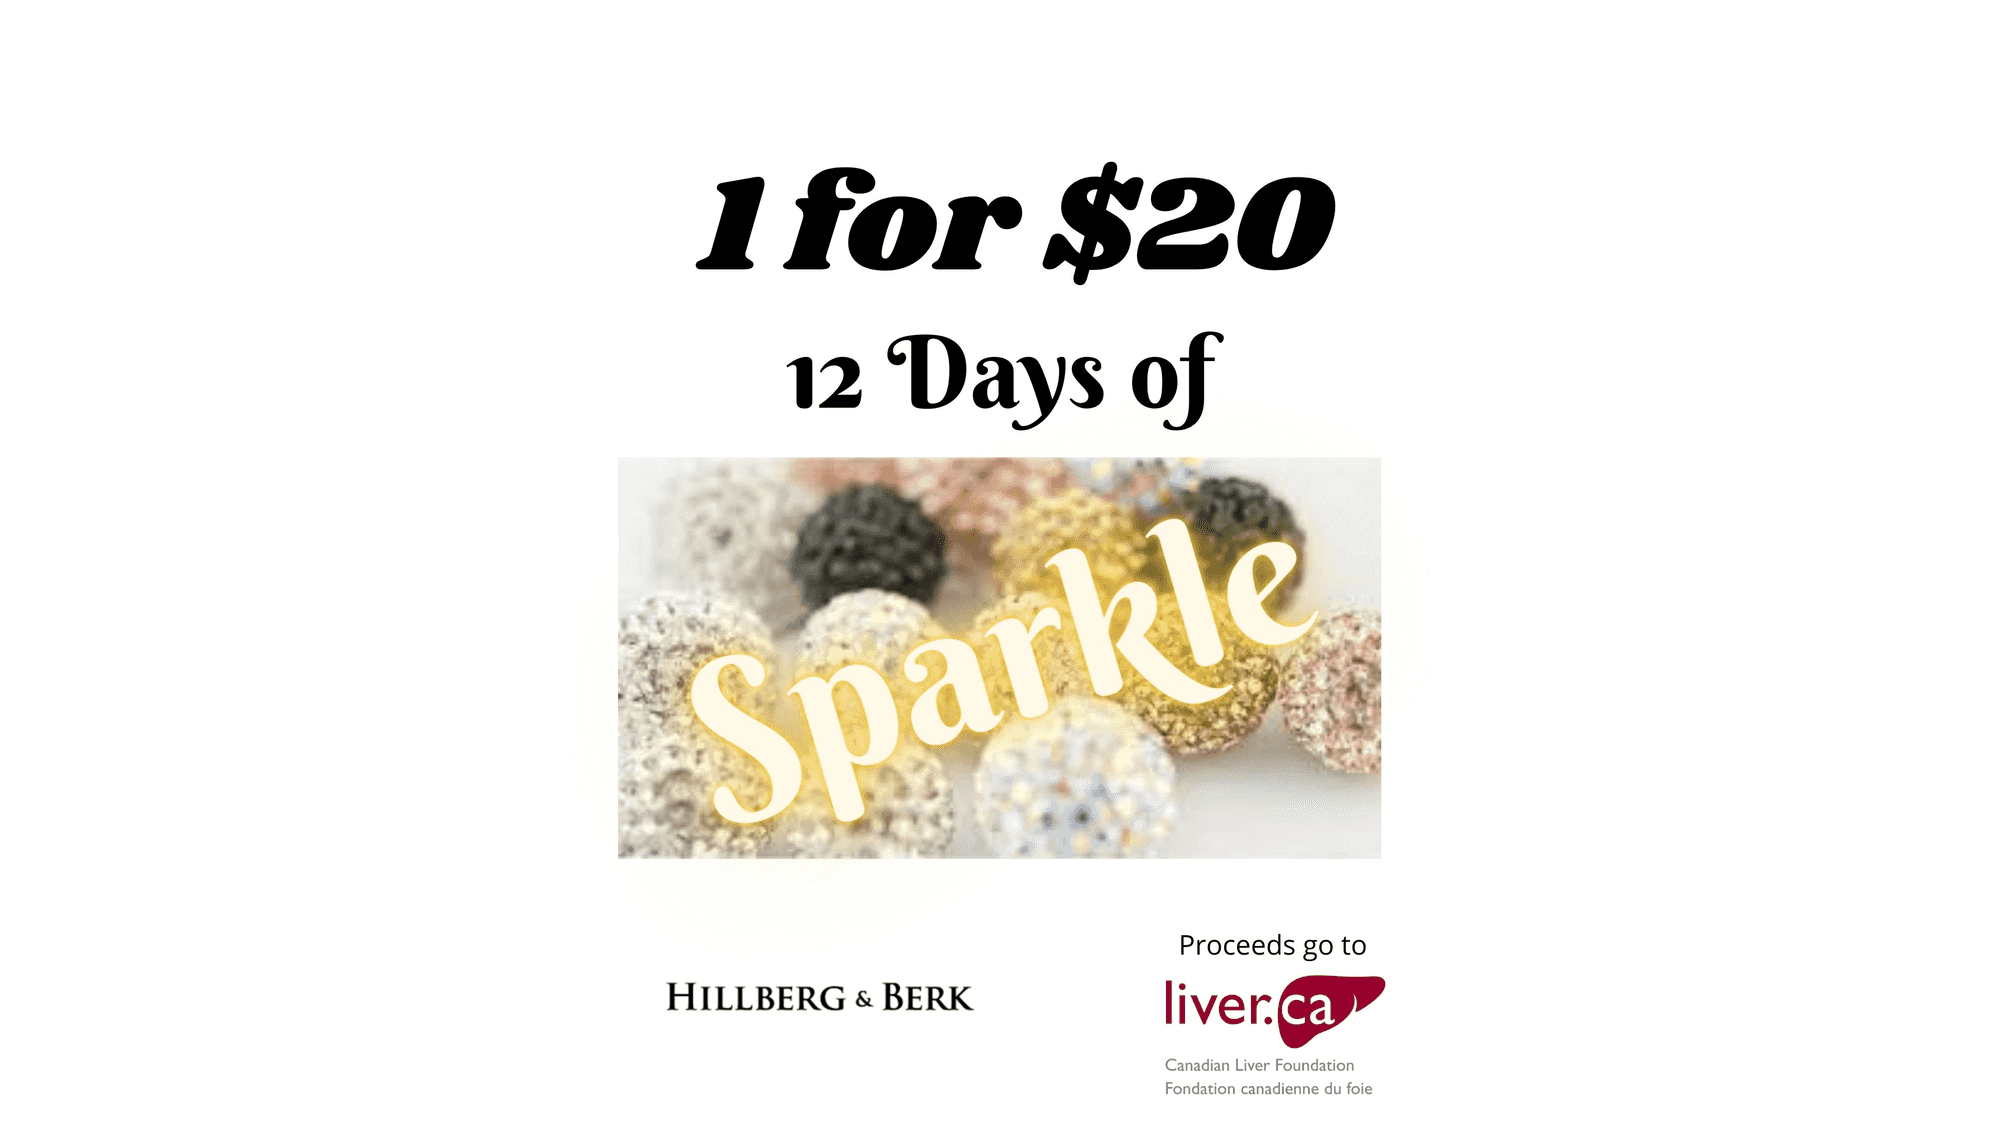 12 Days of Sparkle Raffle- 1 for $20